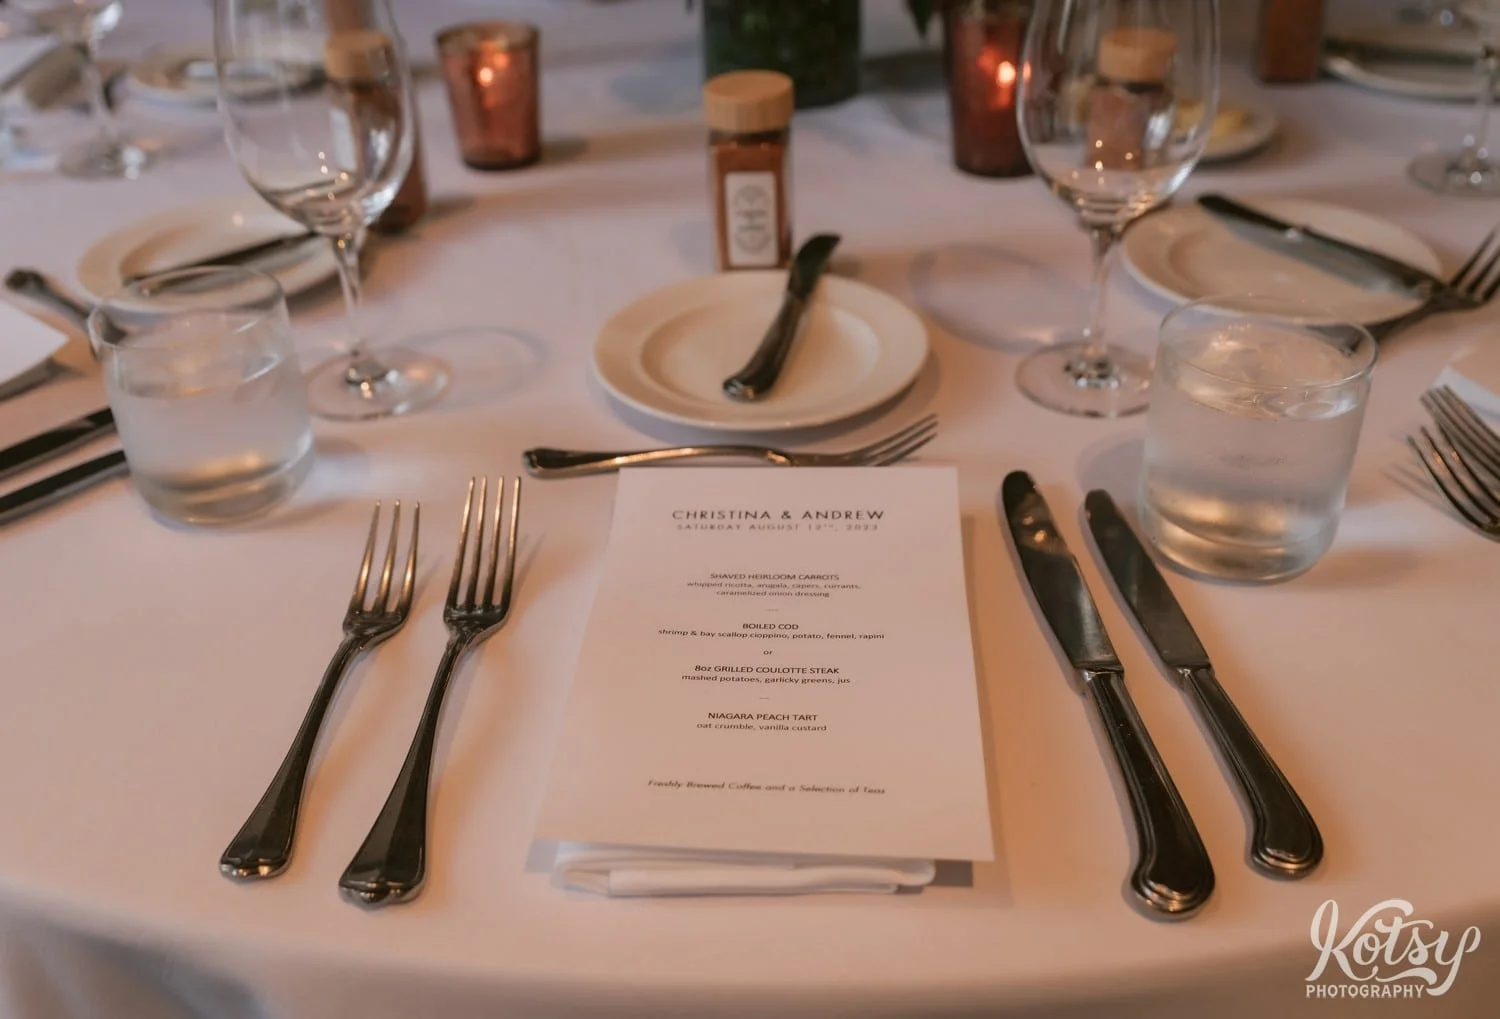 A menu for a 4 course meal is shown on a place setting at a Village Loft wedding reception in Toronto, Canada